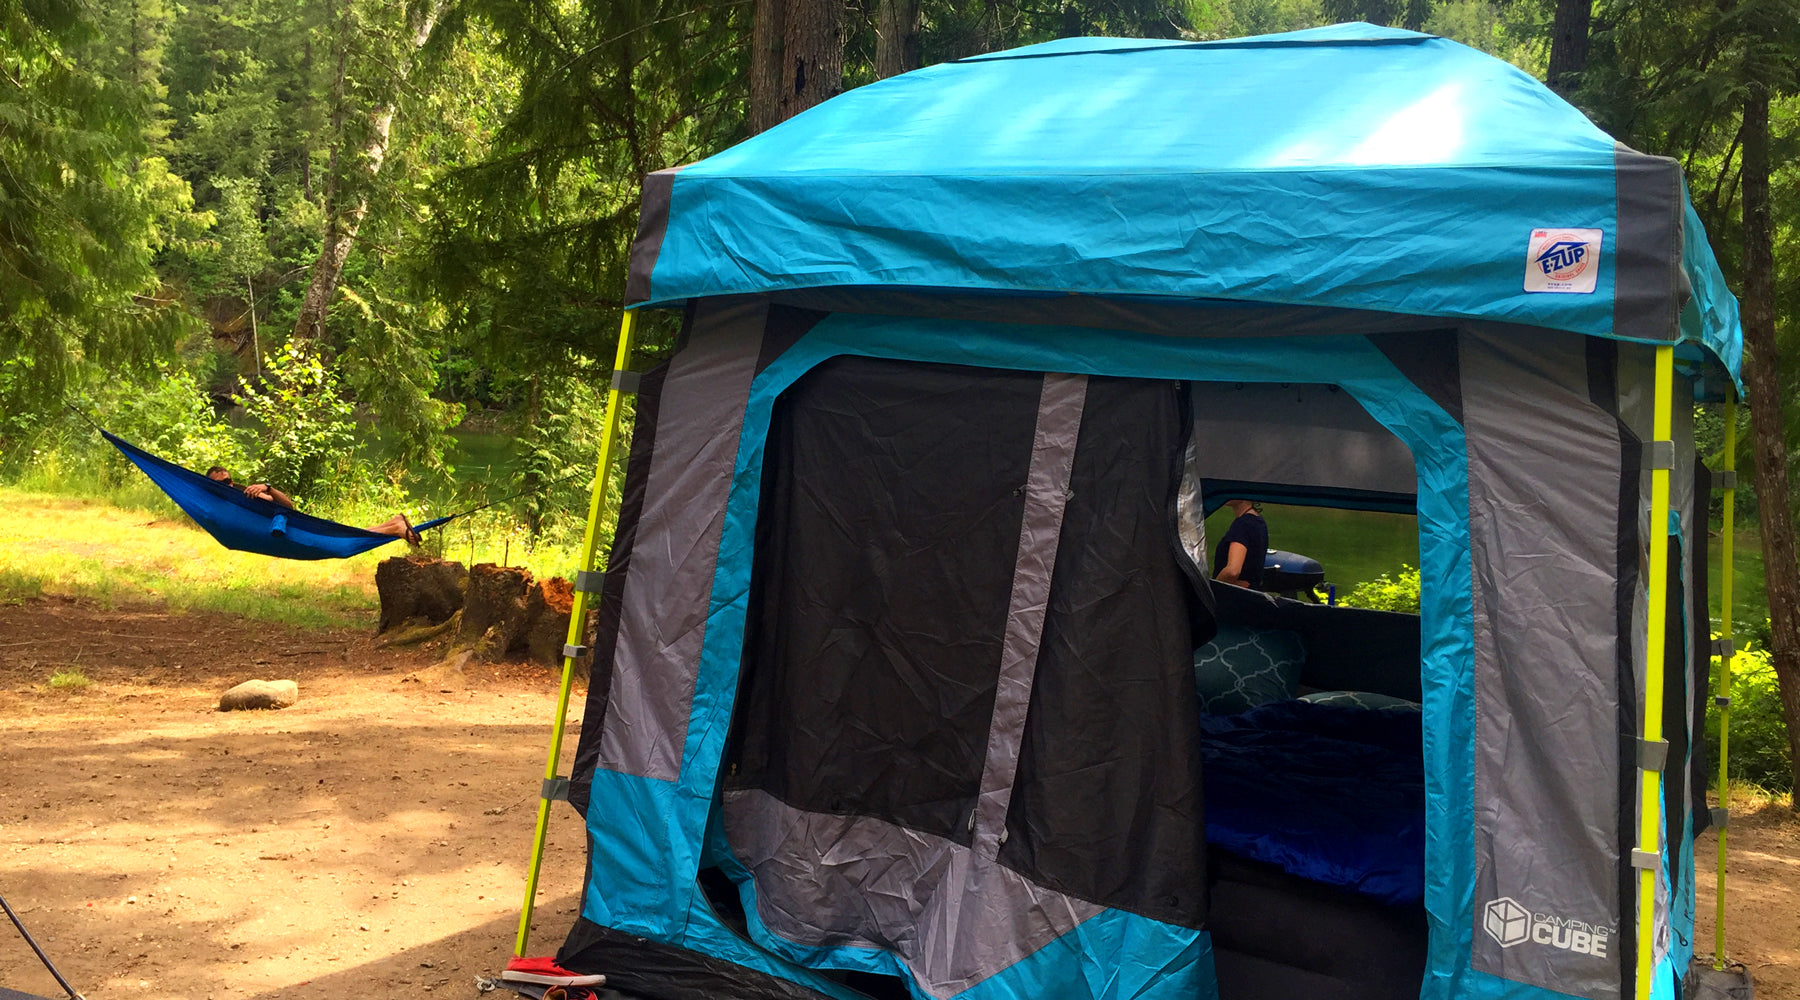 Family Camping Trips with E-Z UP Camping Tents and Accessories